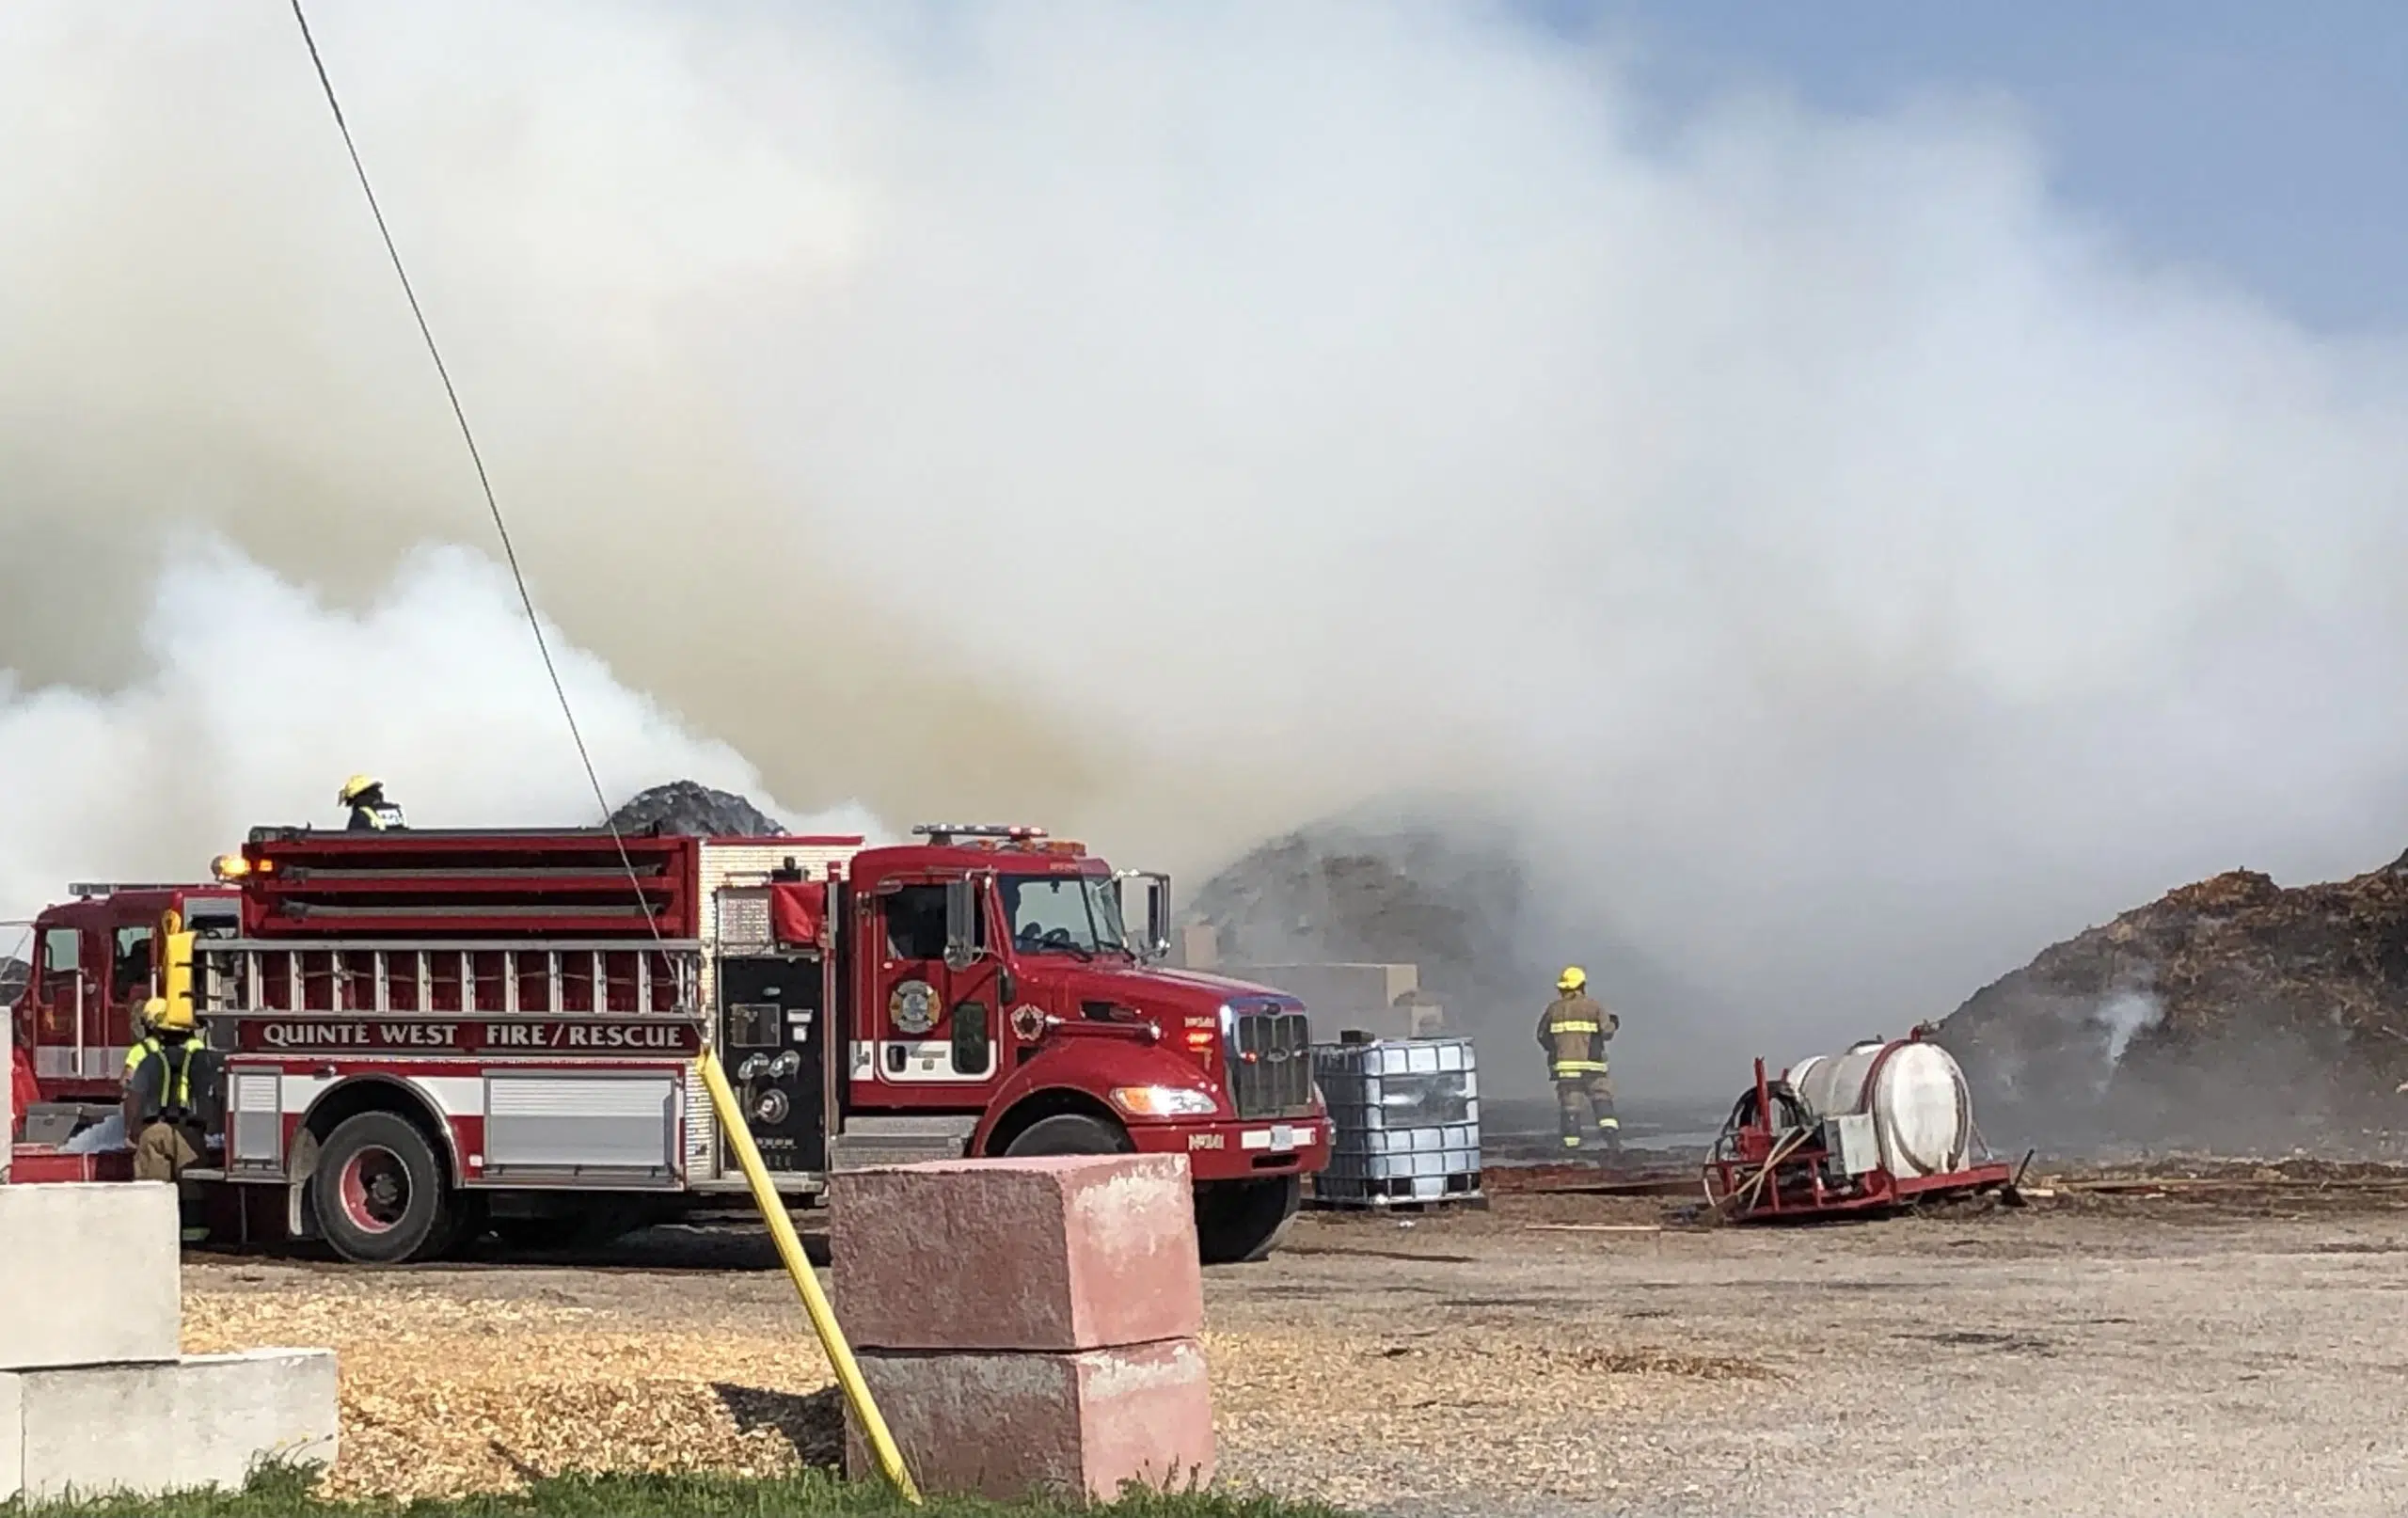 Mulch fire and more in Quinte West